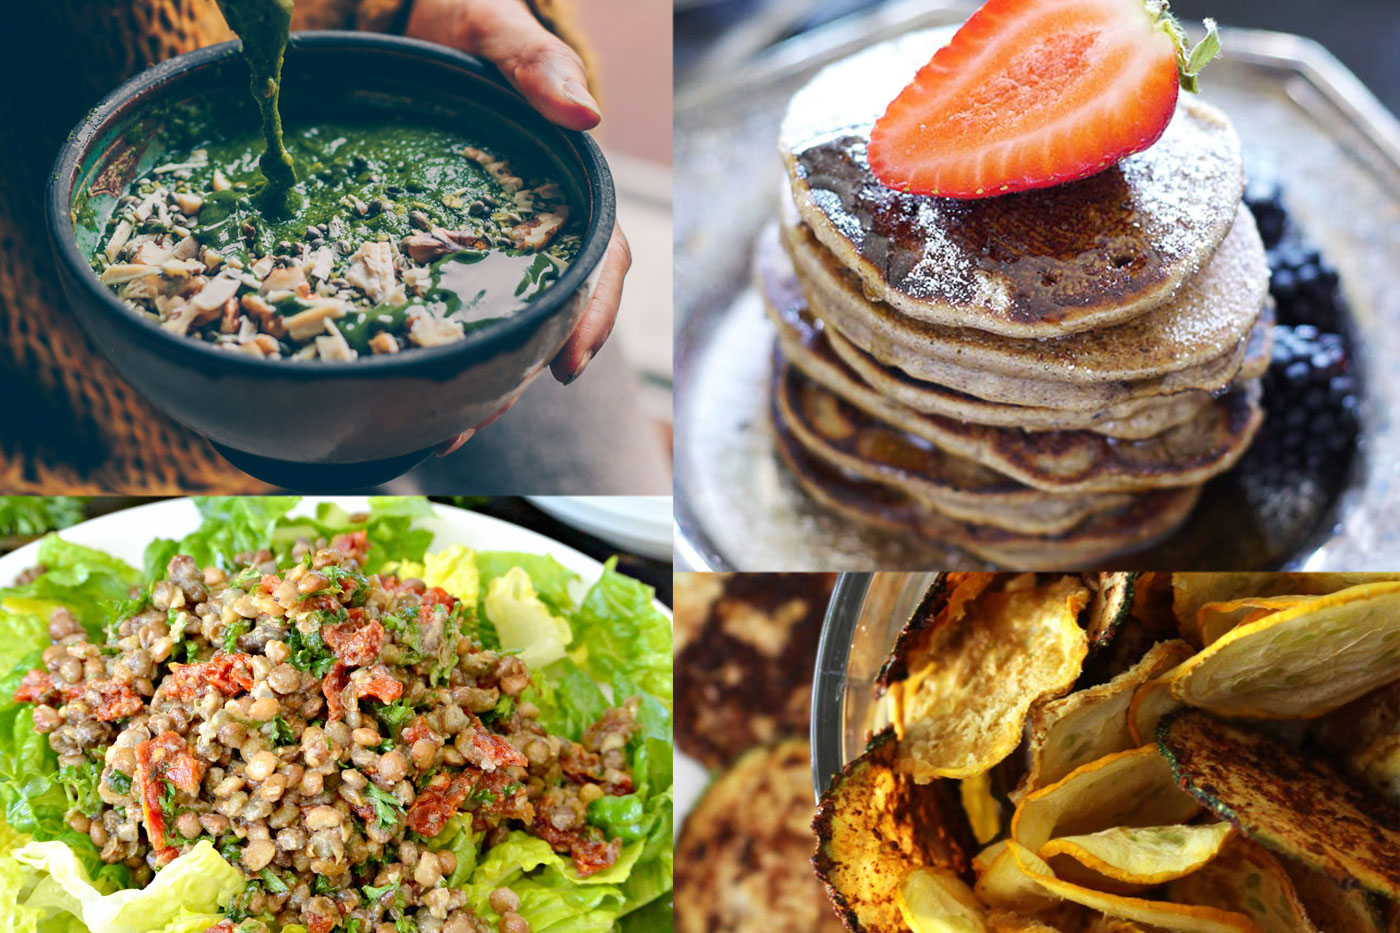 We curated 40 delicious, healthy plant based recipes for you.